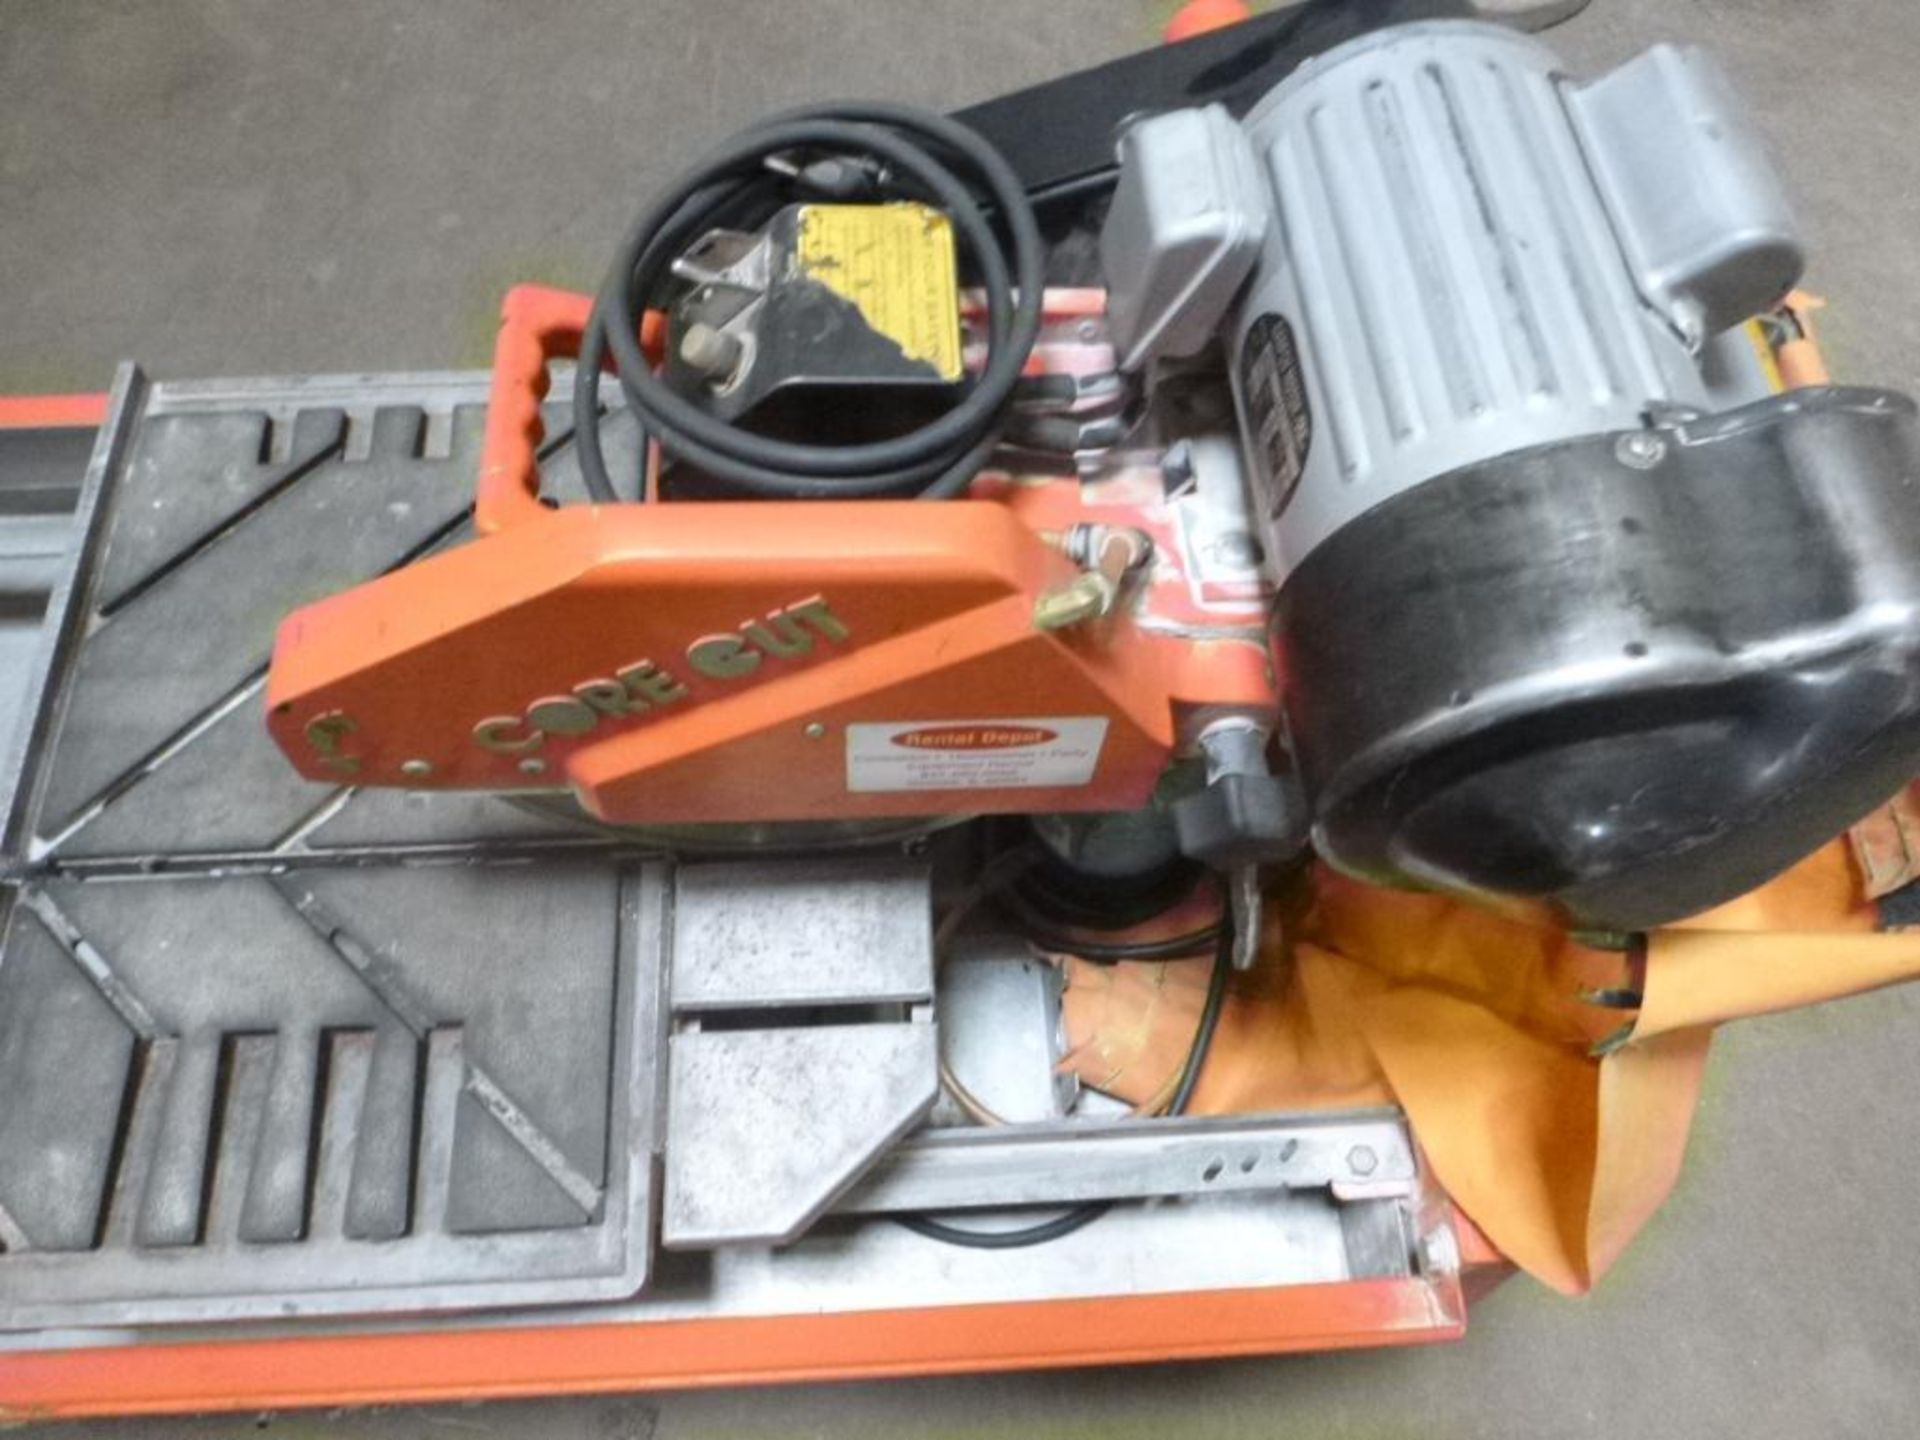 LOT: Core Cut CC1000T 10 in. Tile Saw, S/N CC110163, with Stand, Cuts 24 in. Tile - Image 4 of 8